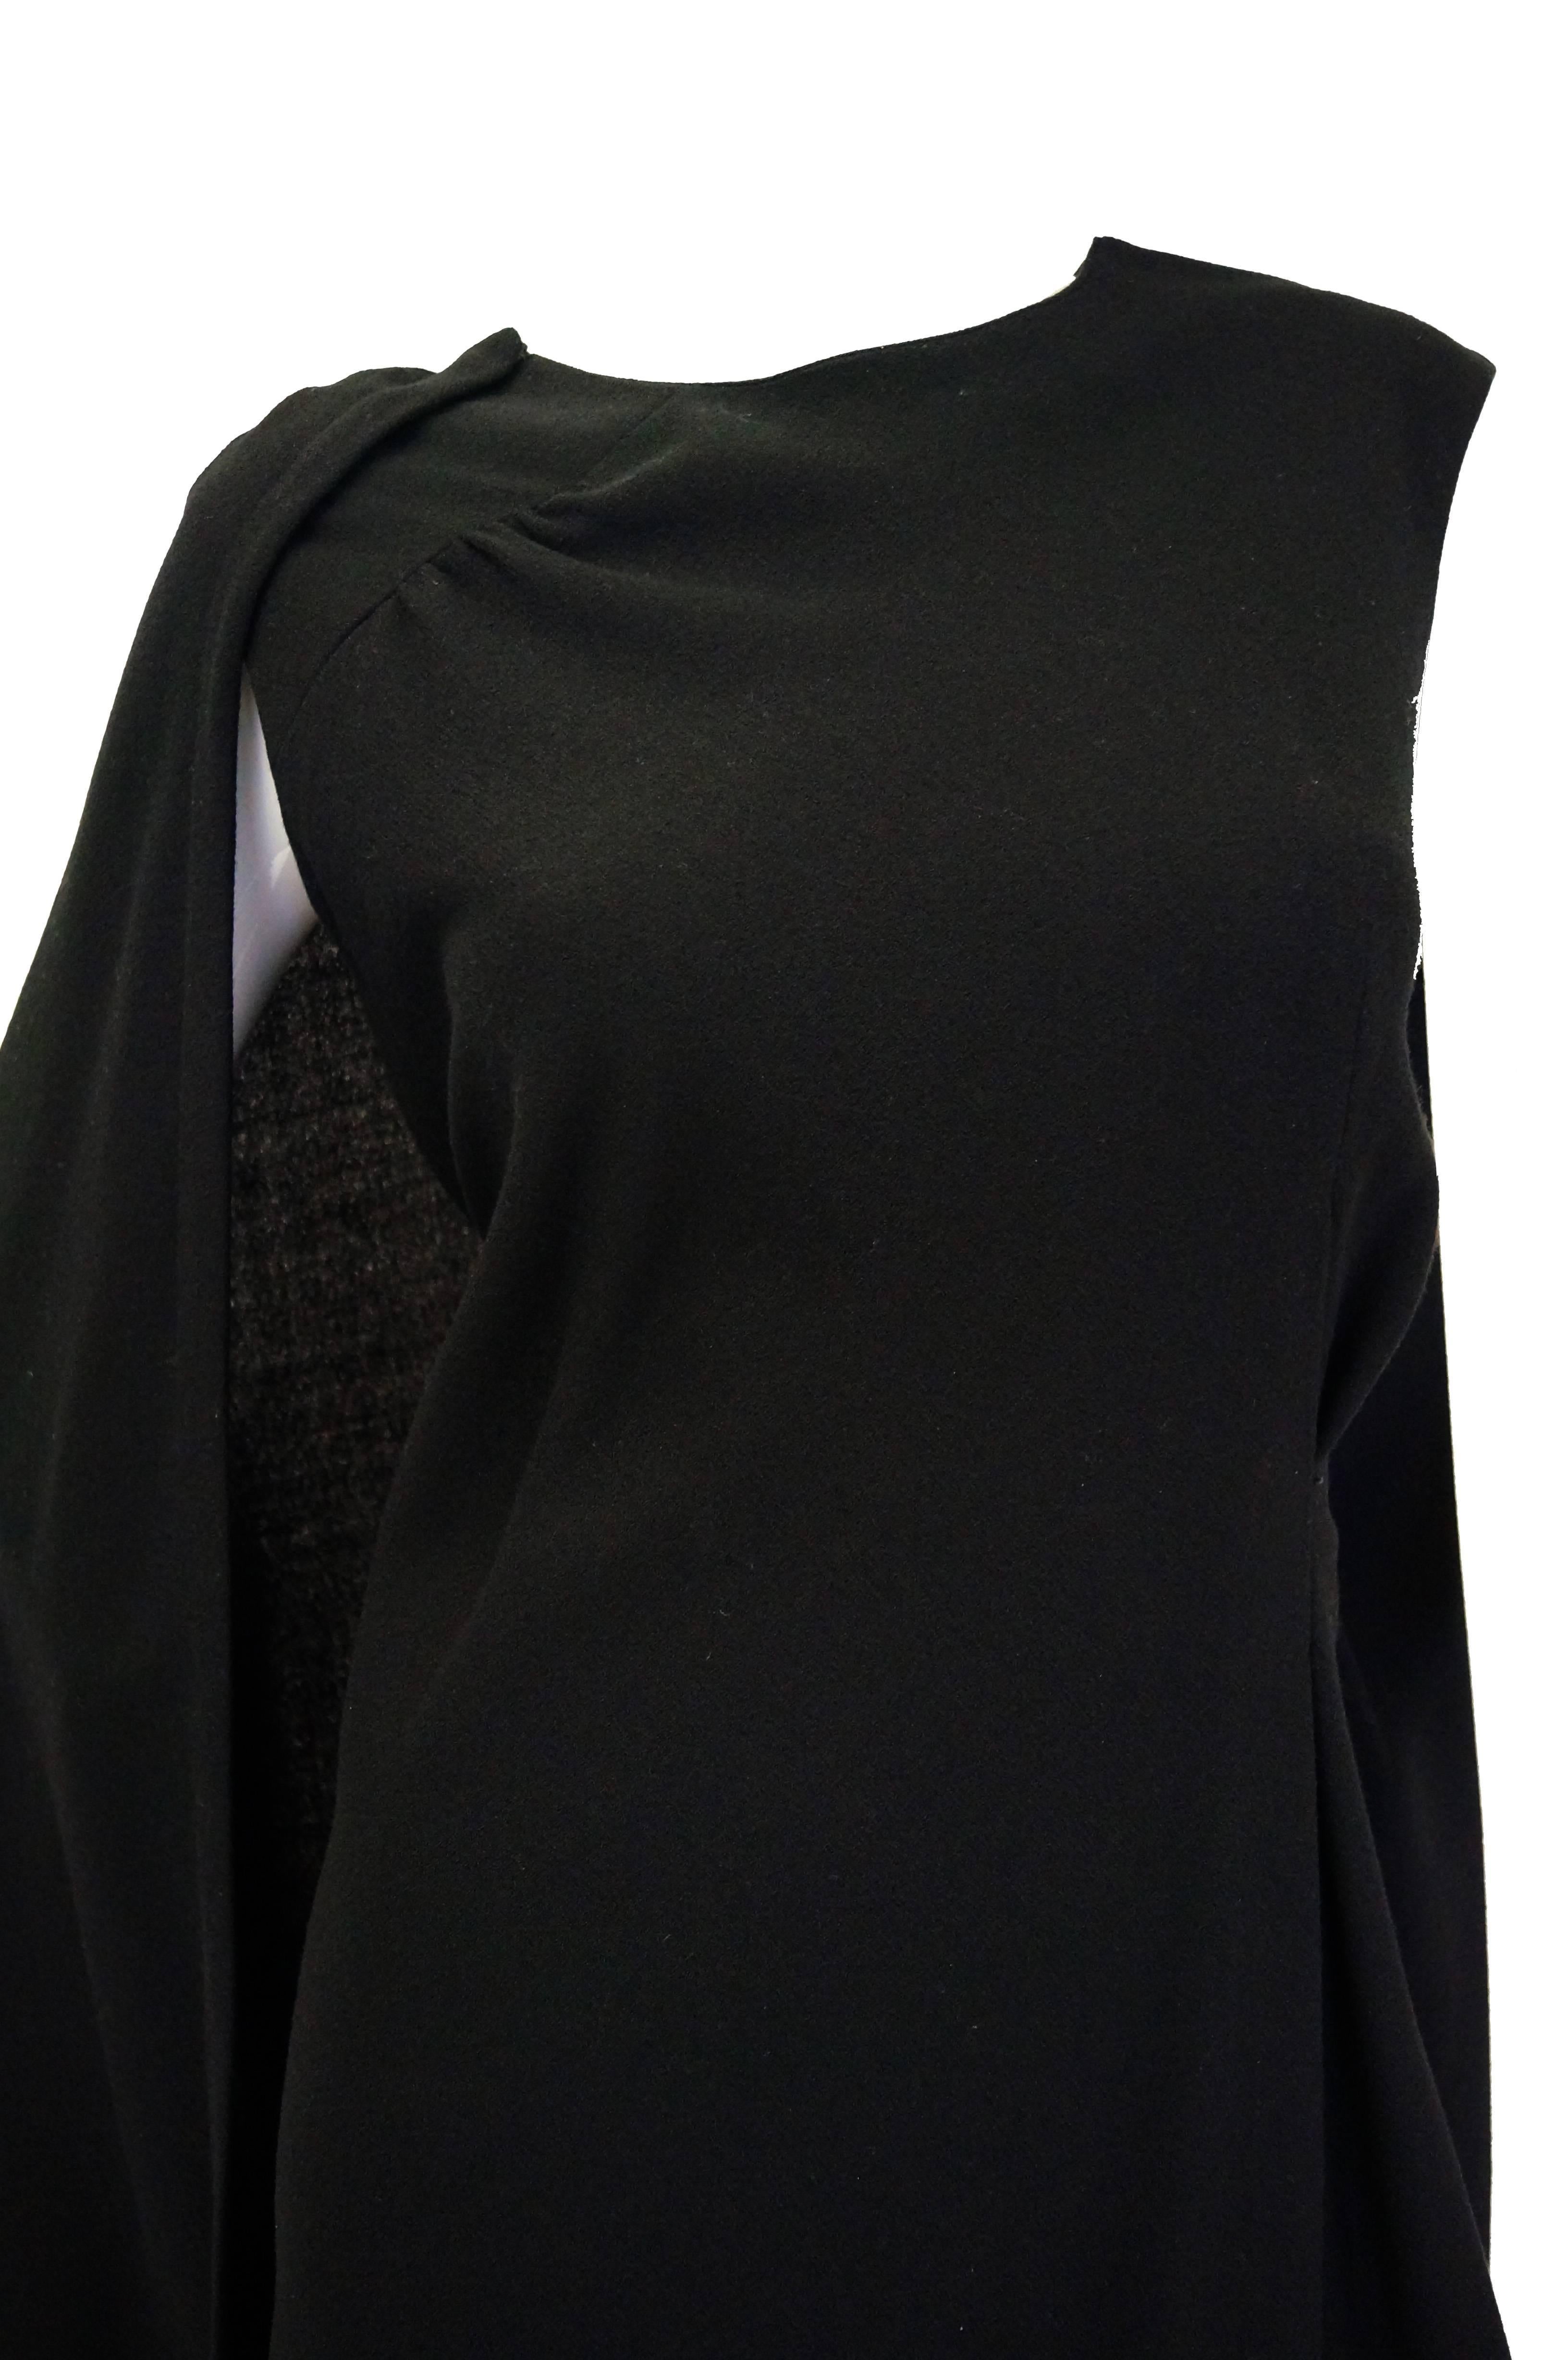 1960s John Moore Black Wool Cape Dress In Excellent Condition For Sale In Houston, TX